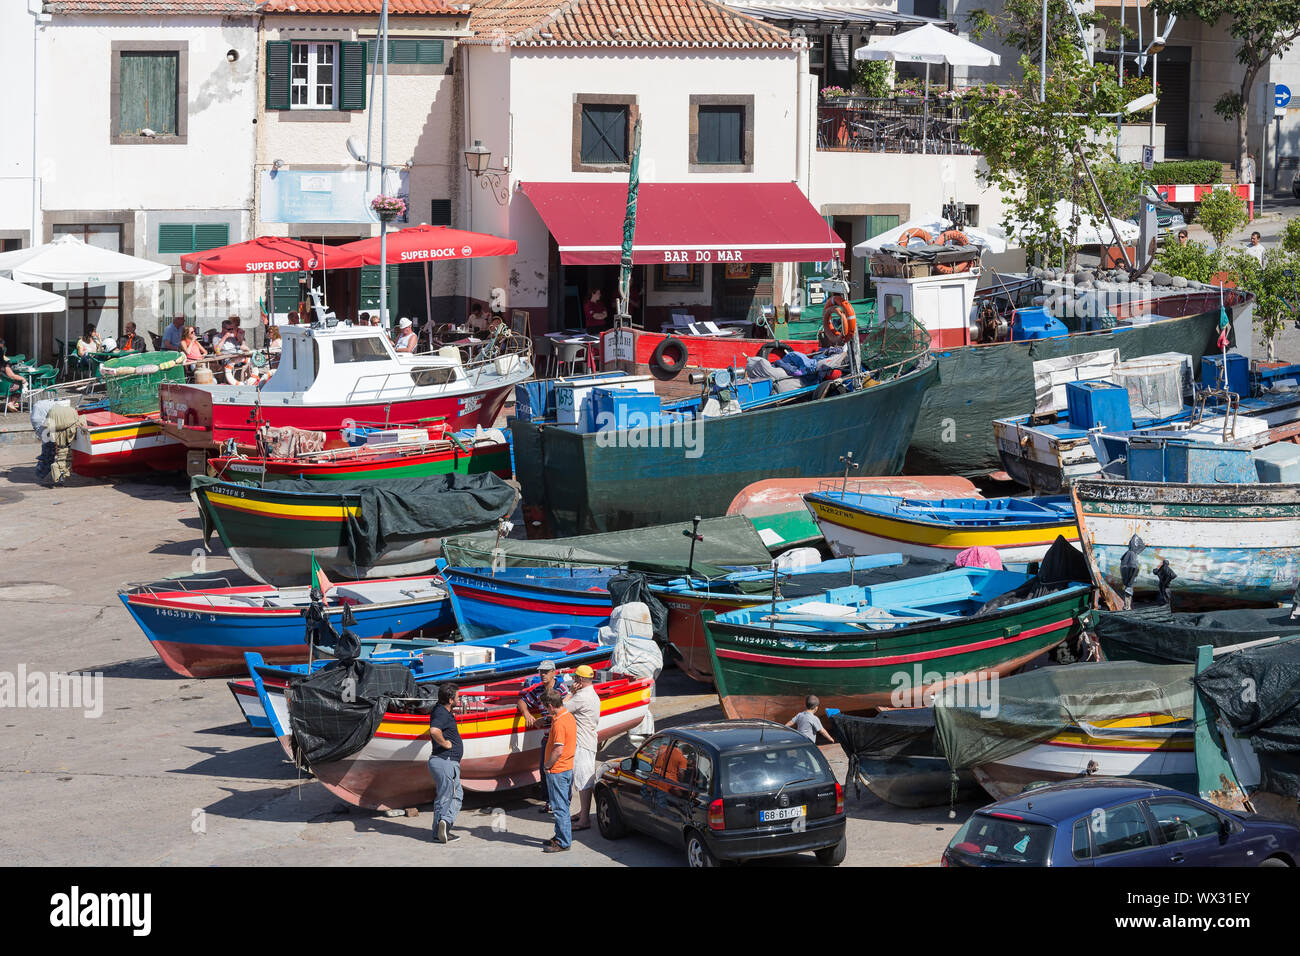 Harbor with fishermen and fishing ships in Funchal, Portugal Stock Photo